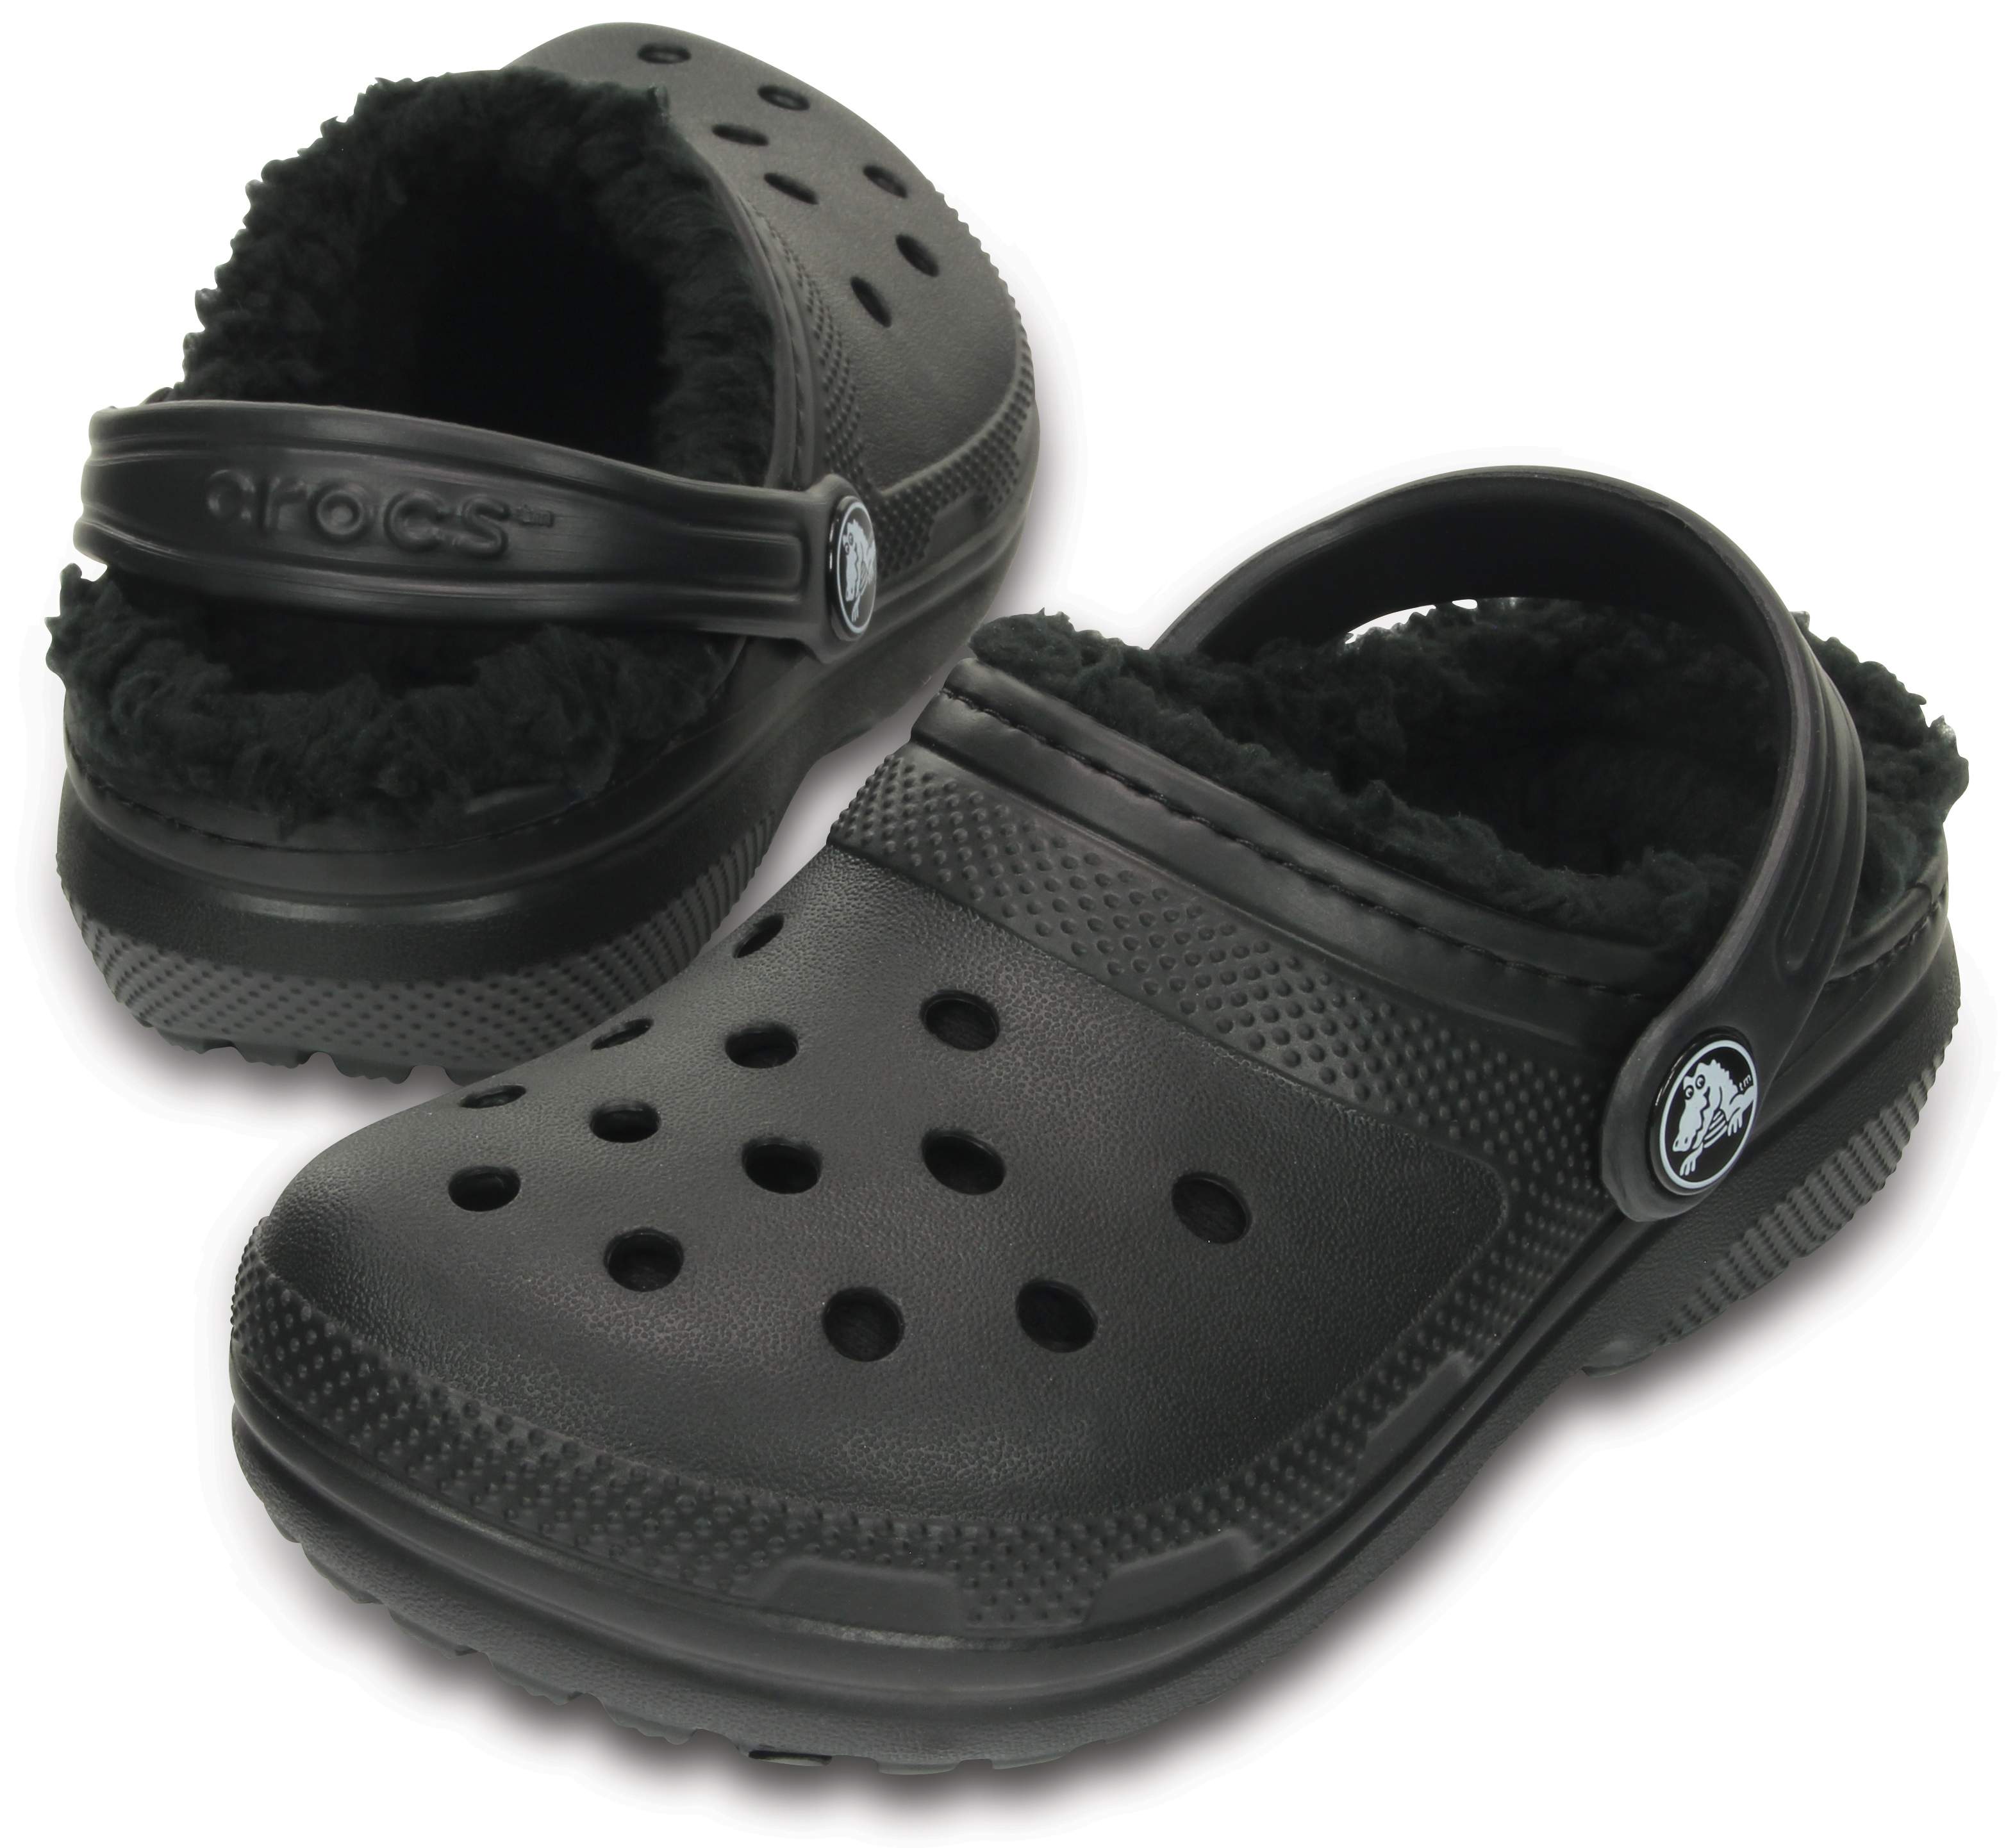 crocs for kids with fur